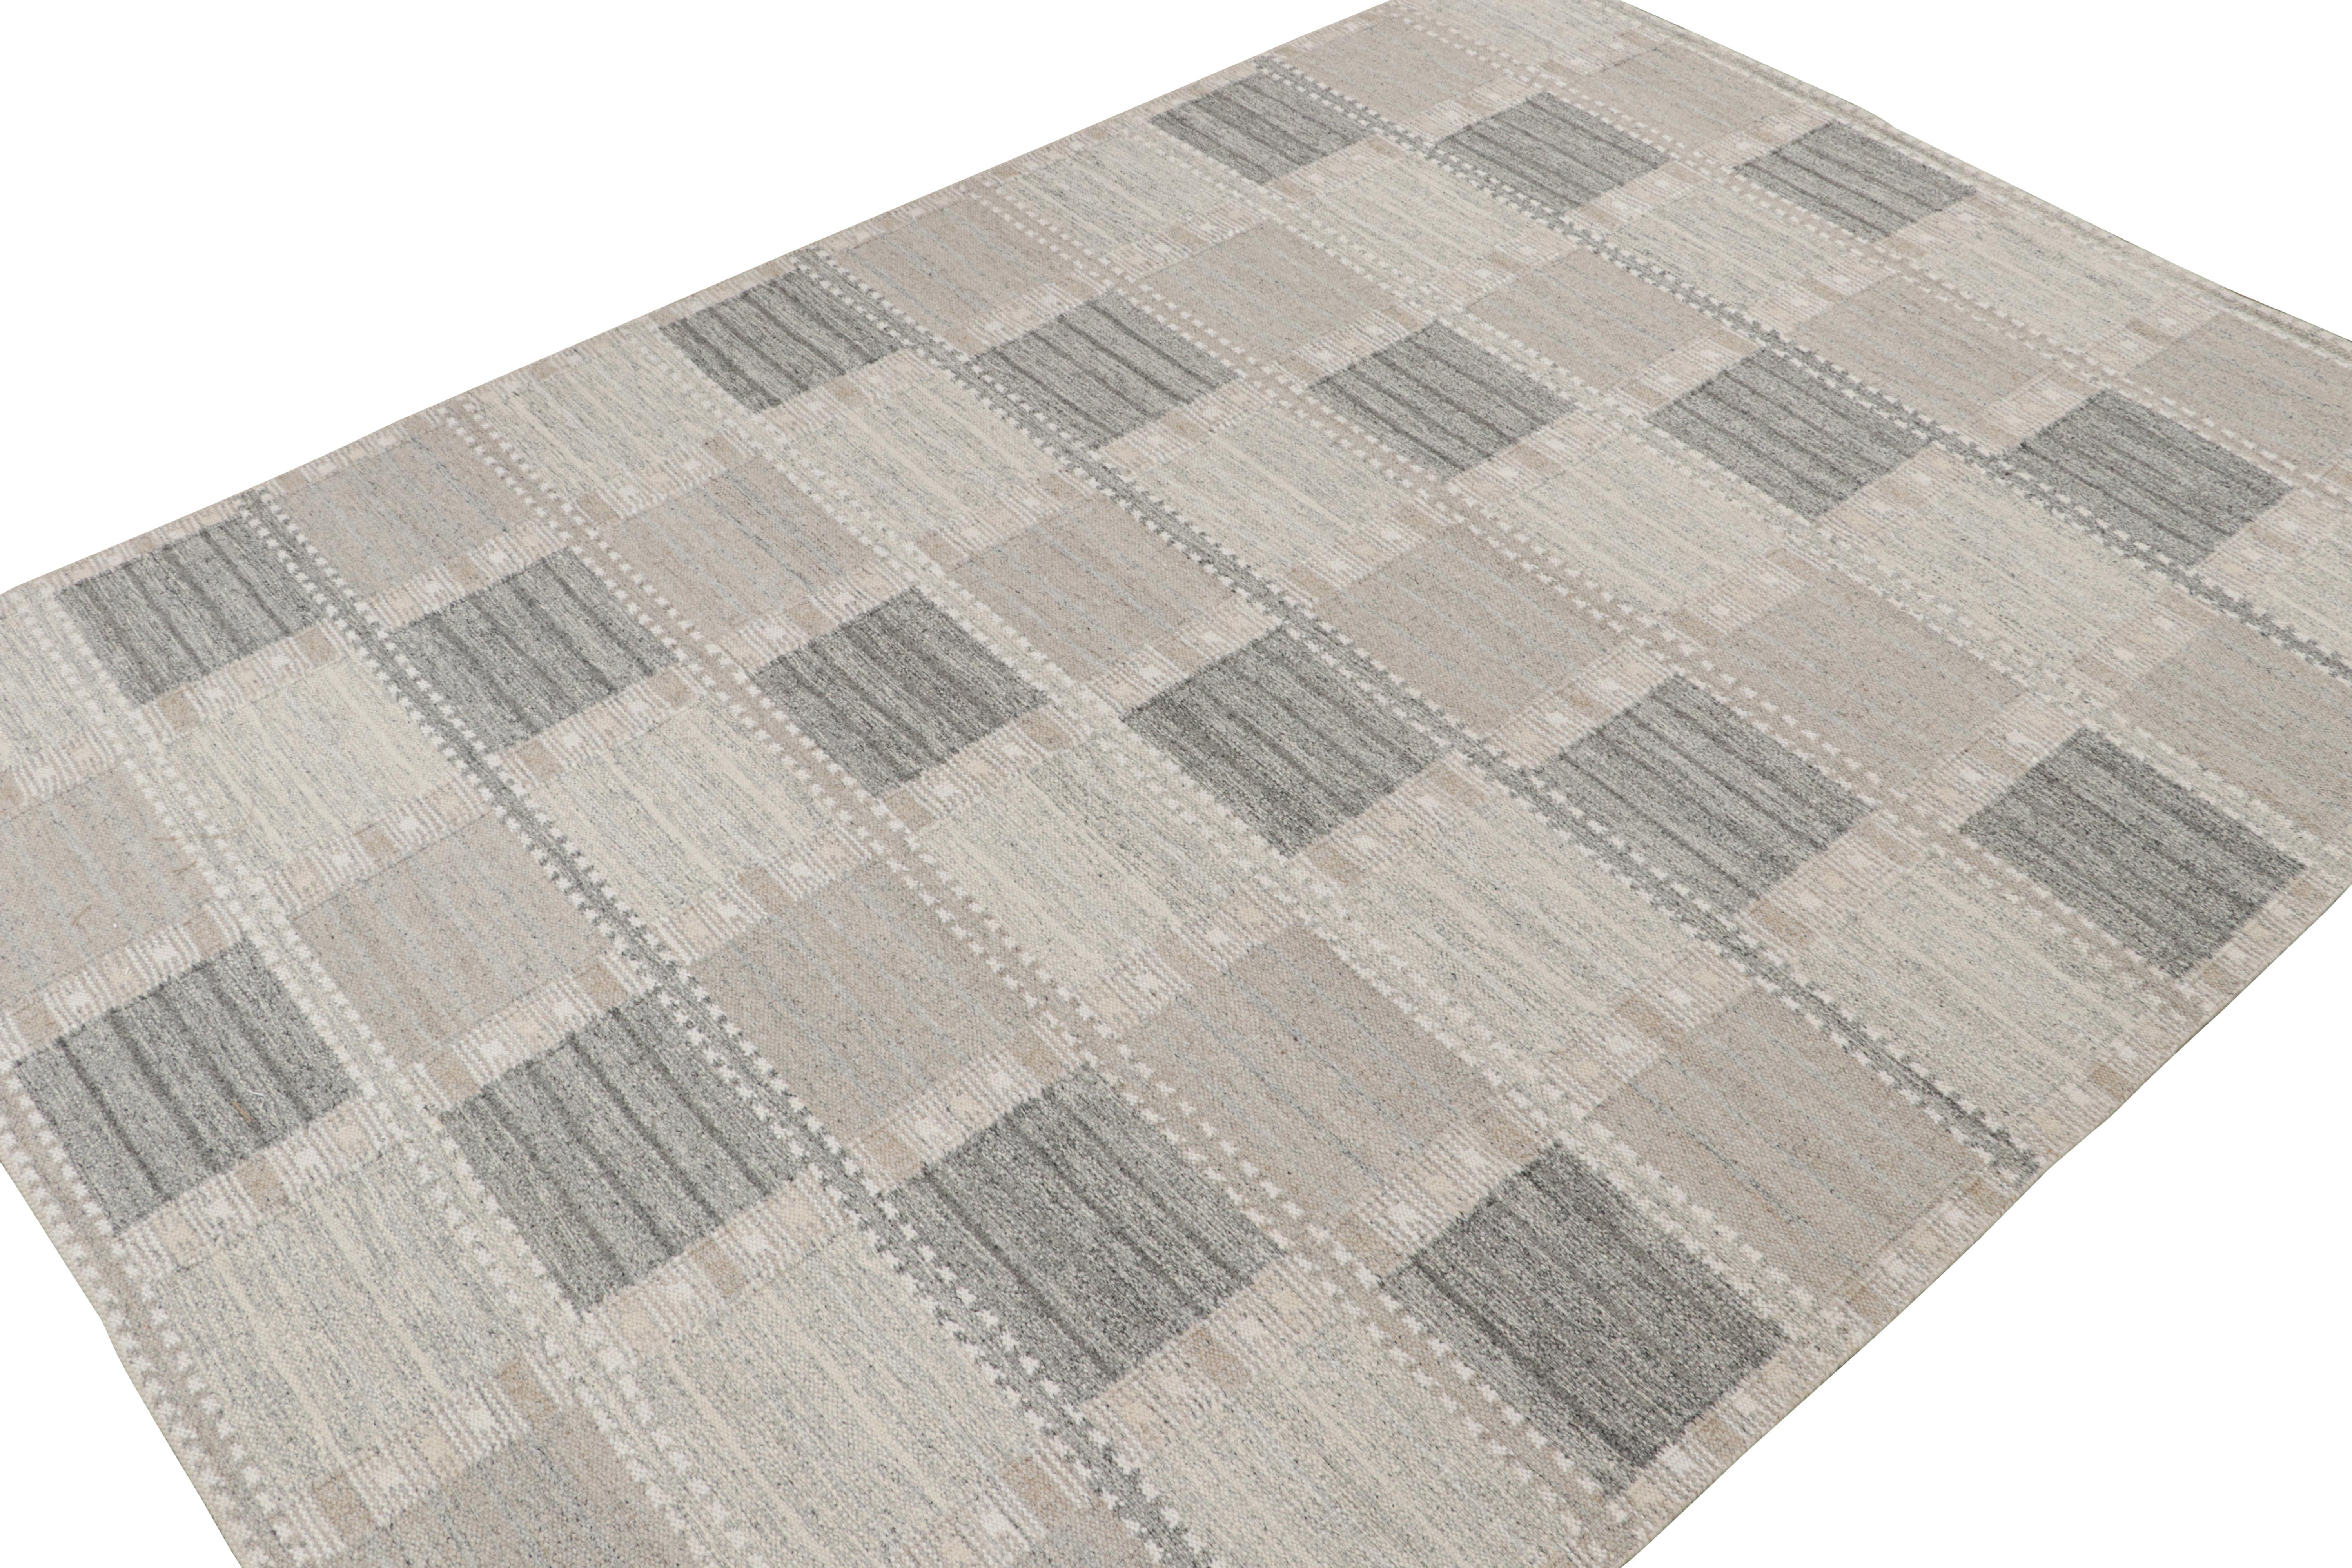 This 10x14 flat weave rug is a new addition to the Scandinavian rug collection by Rug & Kilim. Handwoven in wool, cotton and natural yarns, its design reflects a contemporary take on mid-century Rollakans and Swedish Deco style.

On the